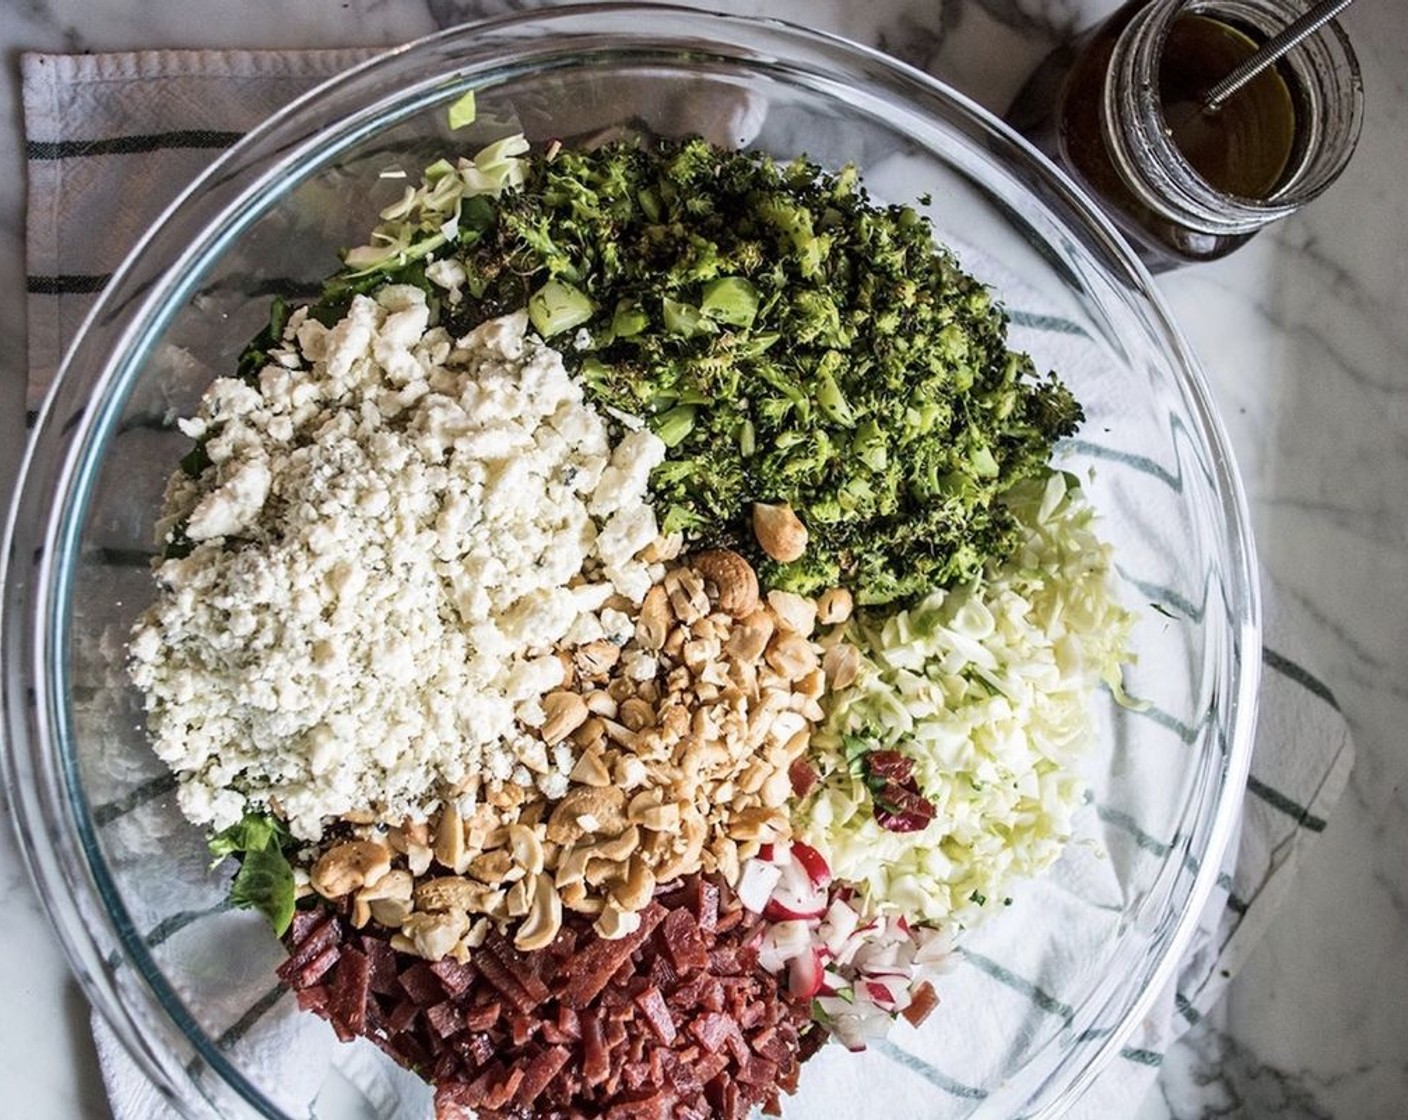 step 5 Add Salad Greens (6 cups), Green Cabbage (2 cups), and Radish (1 bunch) to a large bowl. Then top with Turkey Bacon (8 slices) and broccoli, along with Unsalted Cashews (3/4 cup) and Blue Cheese (3/4 cup). Toss or stir until all ingredients are well-mixed.